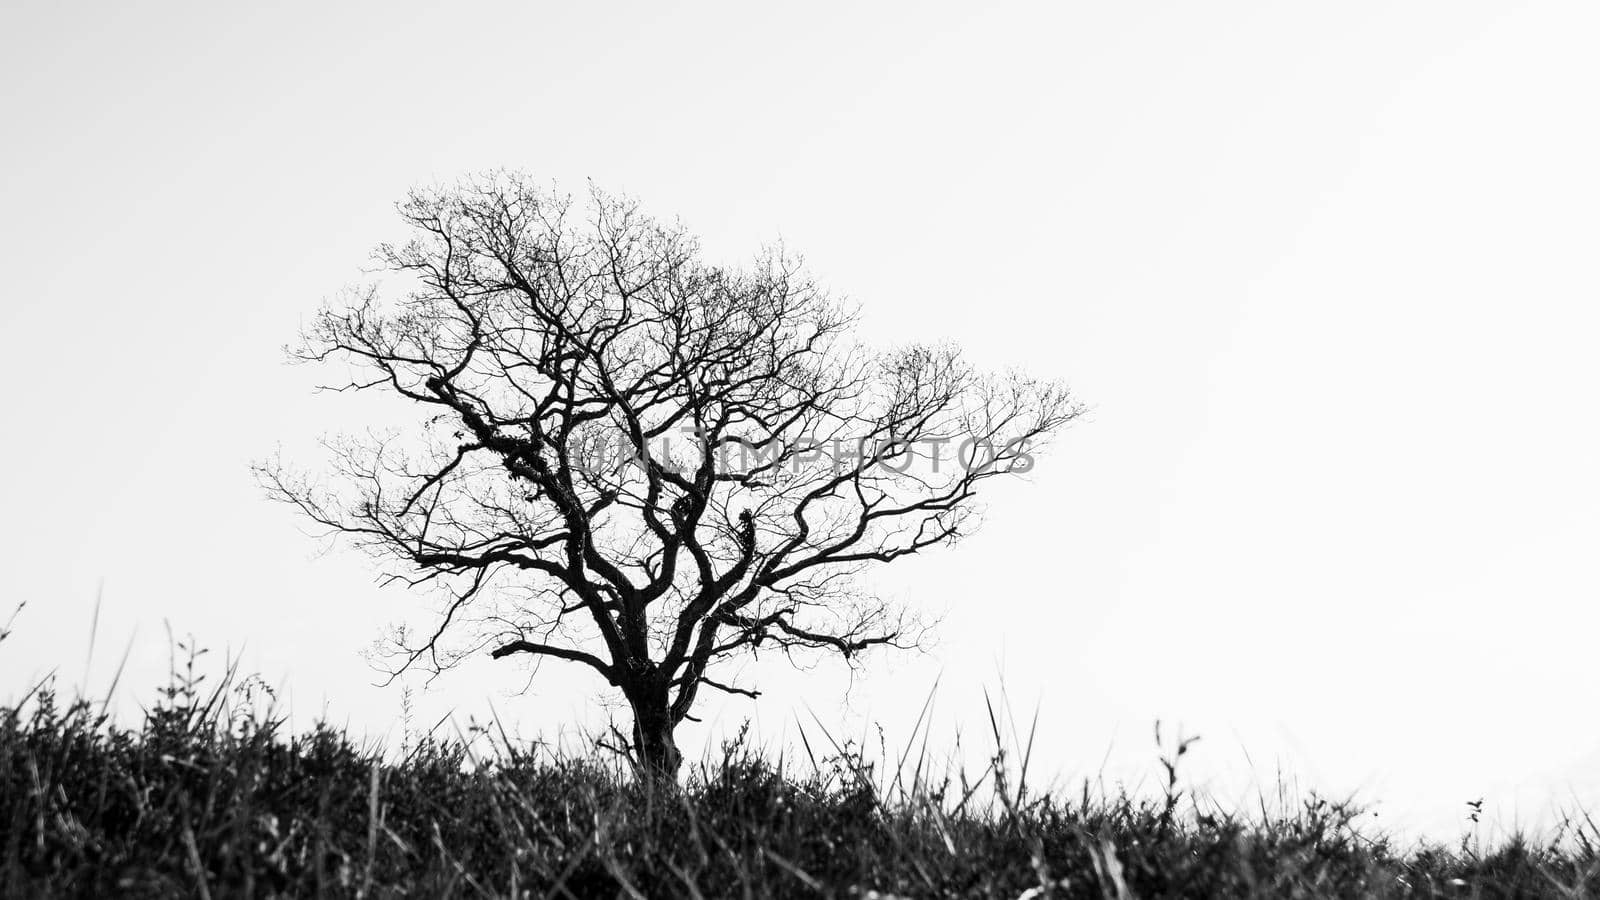 Single tree in winter, black and white photography by dutourdumonde